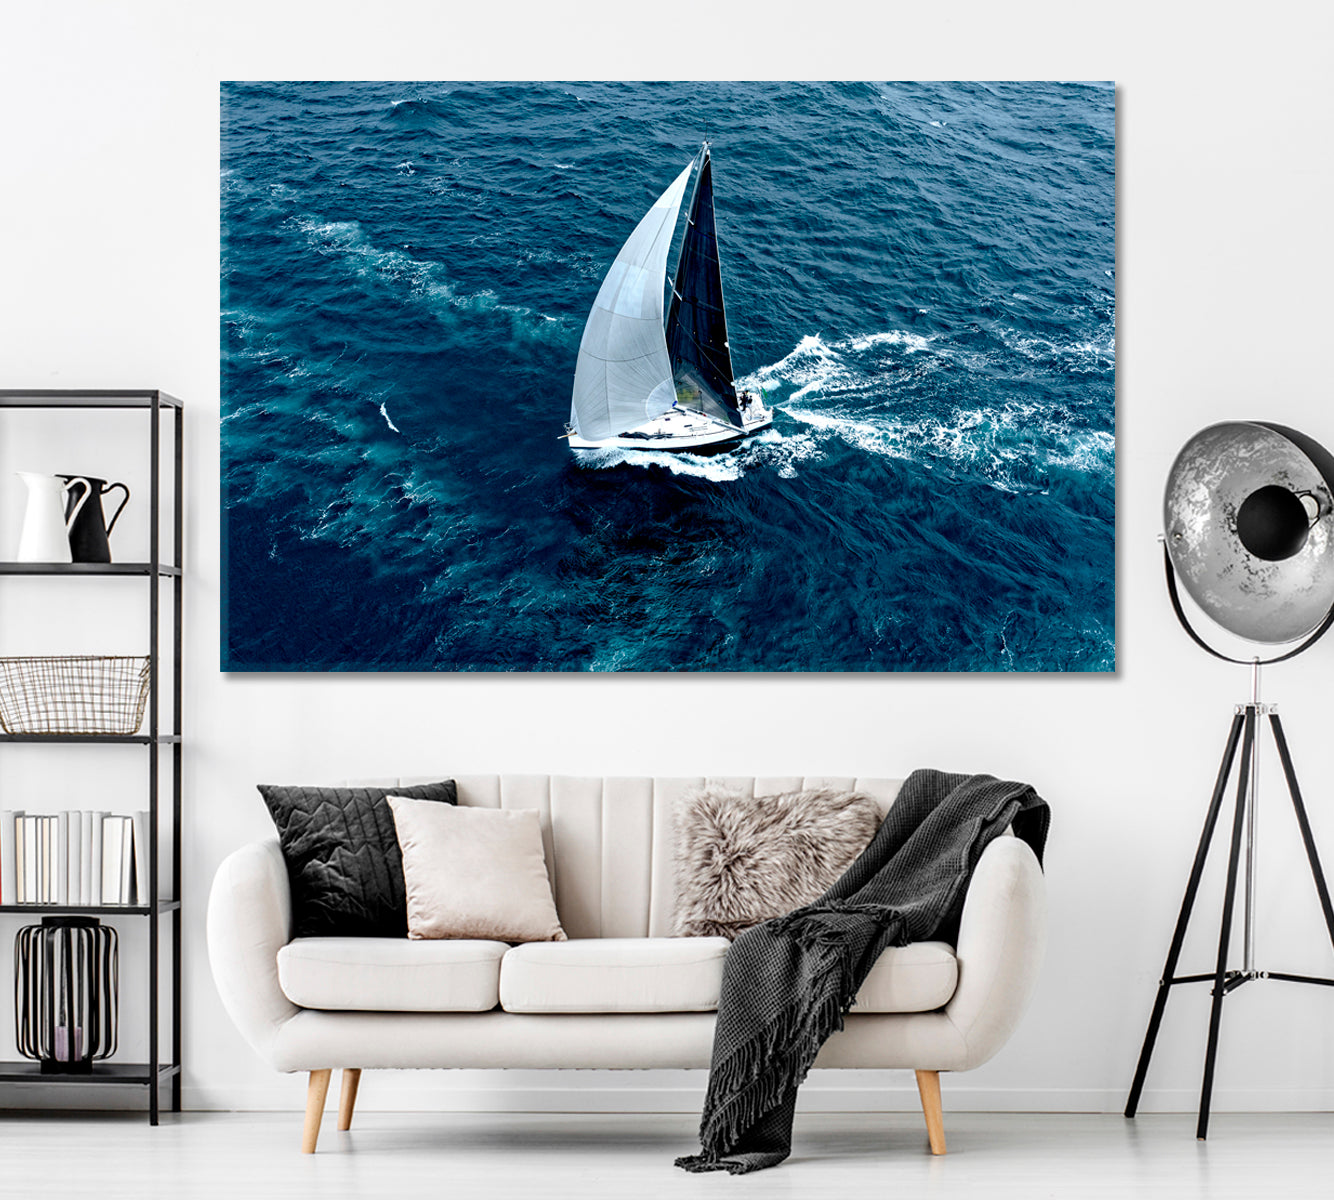 Sailboat with White Sails Canvas Print ArtLexy 1 Panel 24"x16" inches 